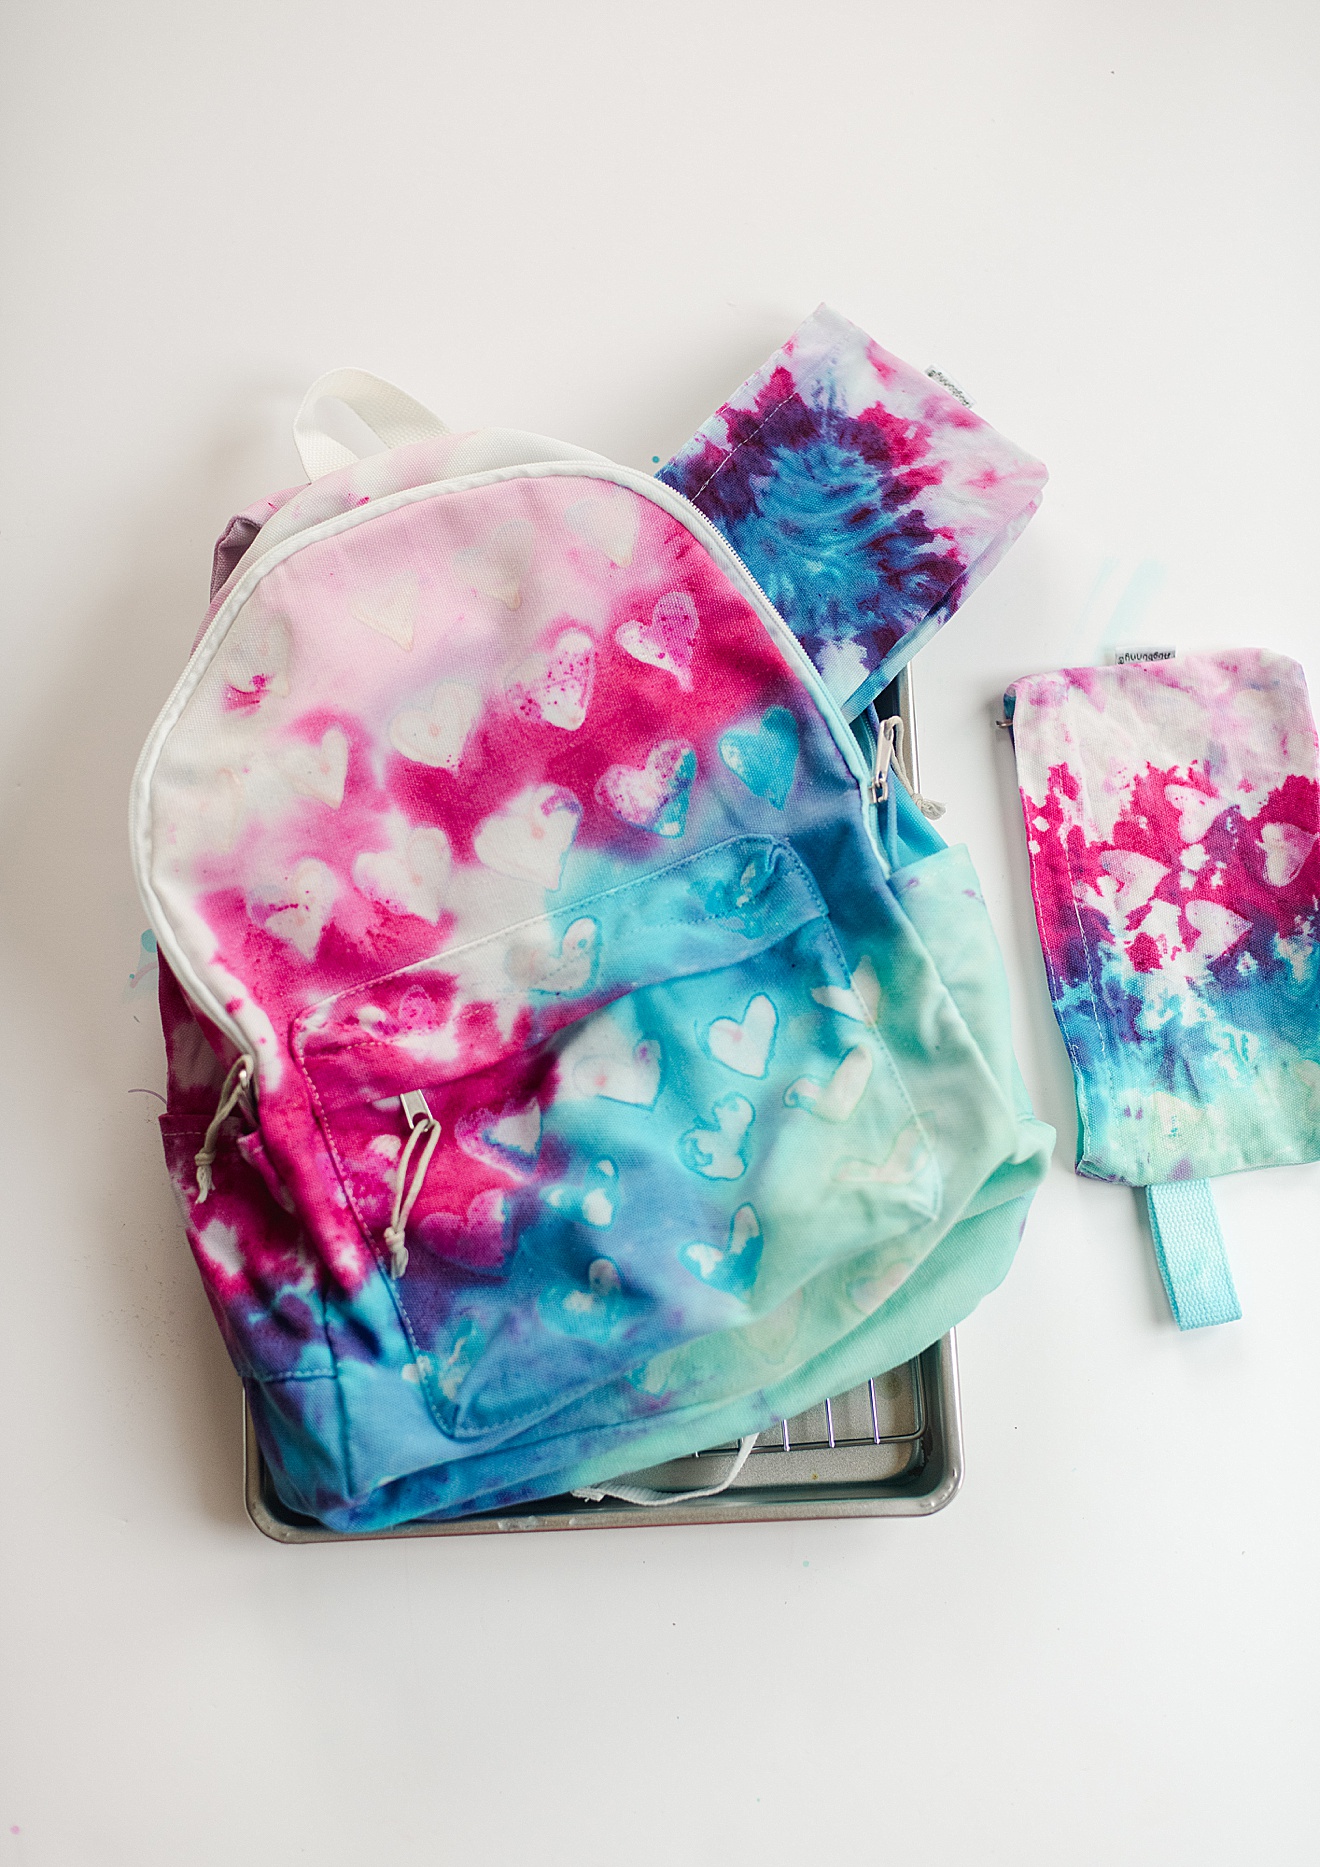 Heart Tie Dye back to school backpack + matching pencil pouch